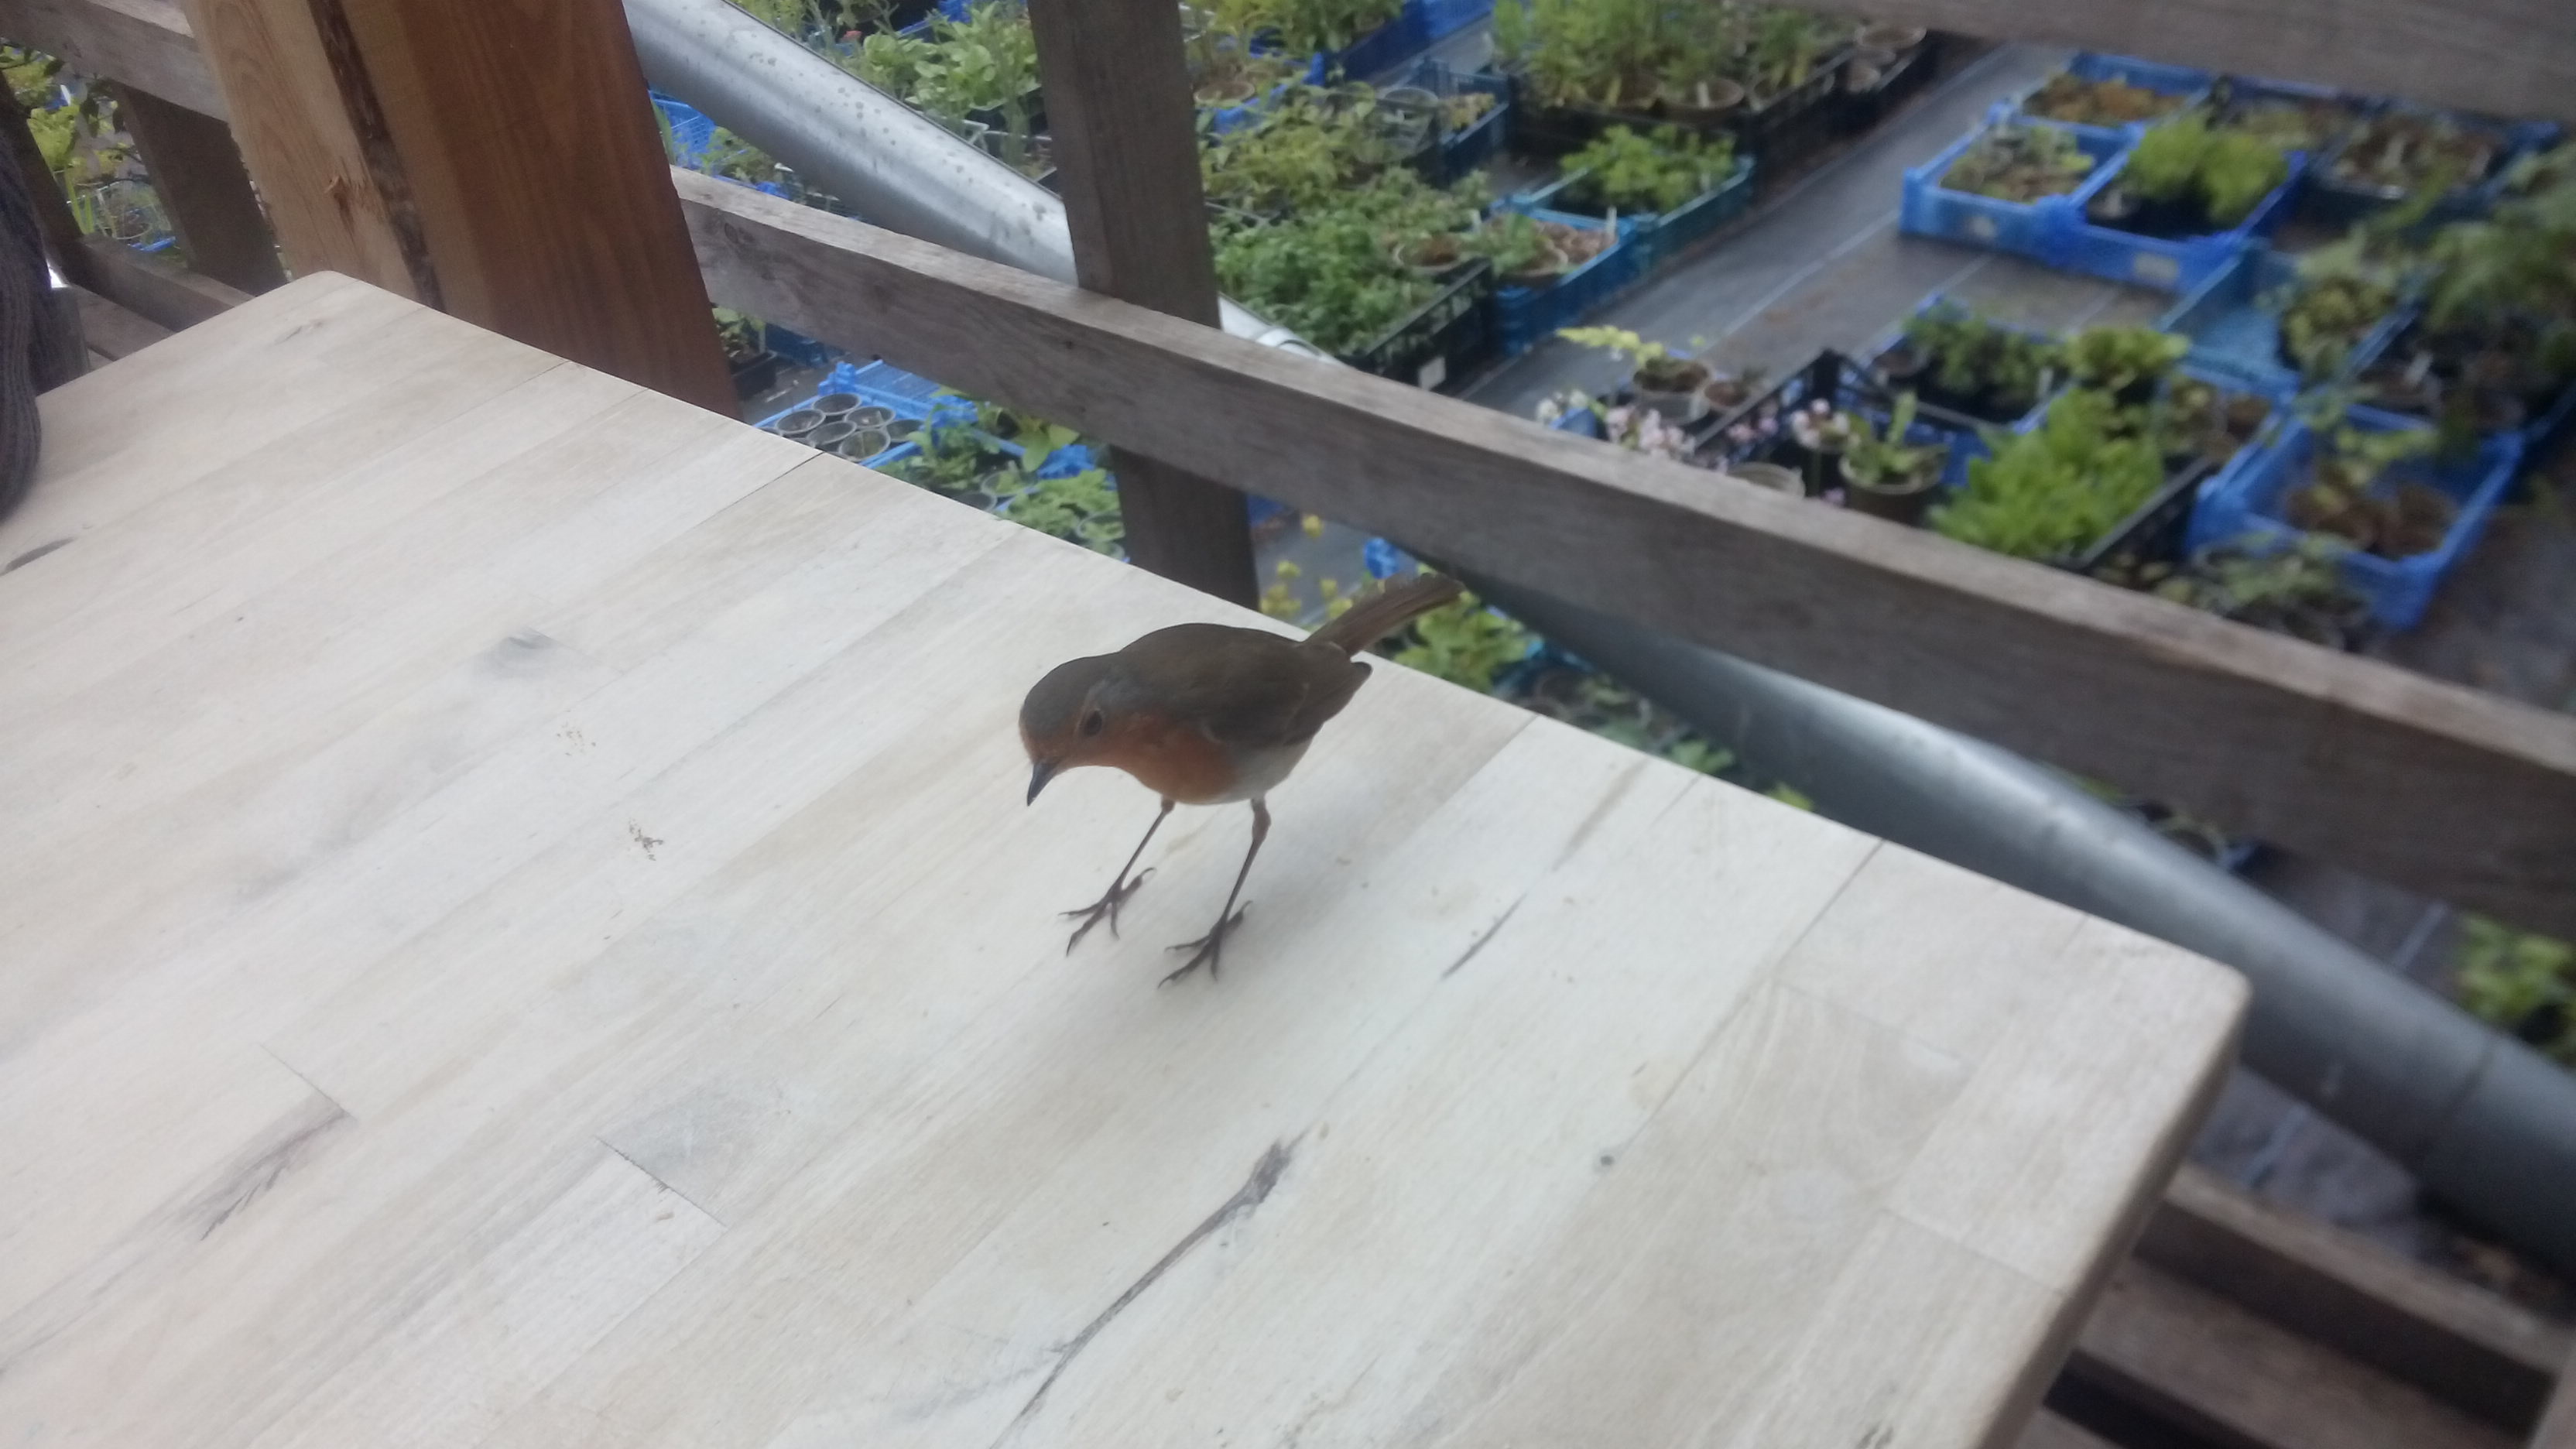 A small robin looks for crumbs on a wooden table